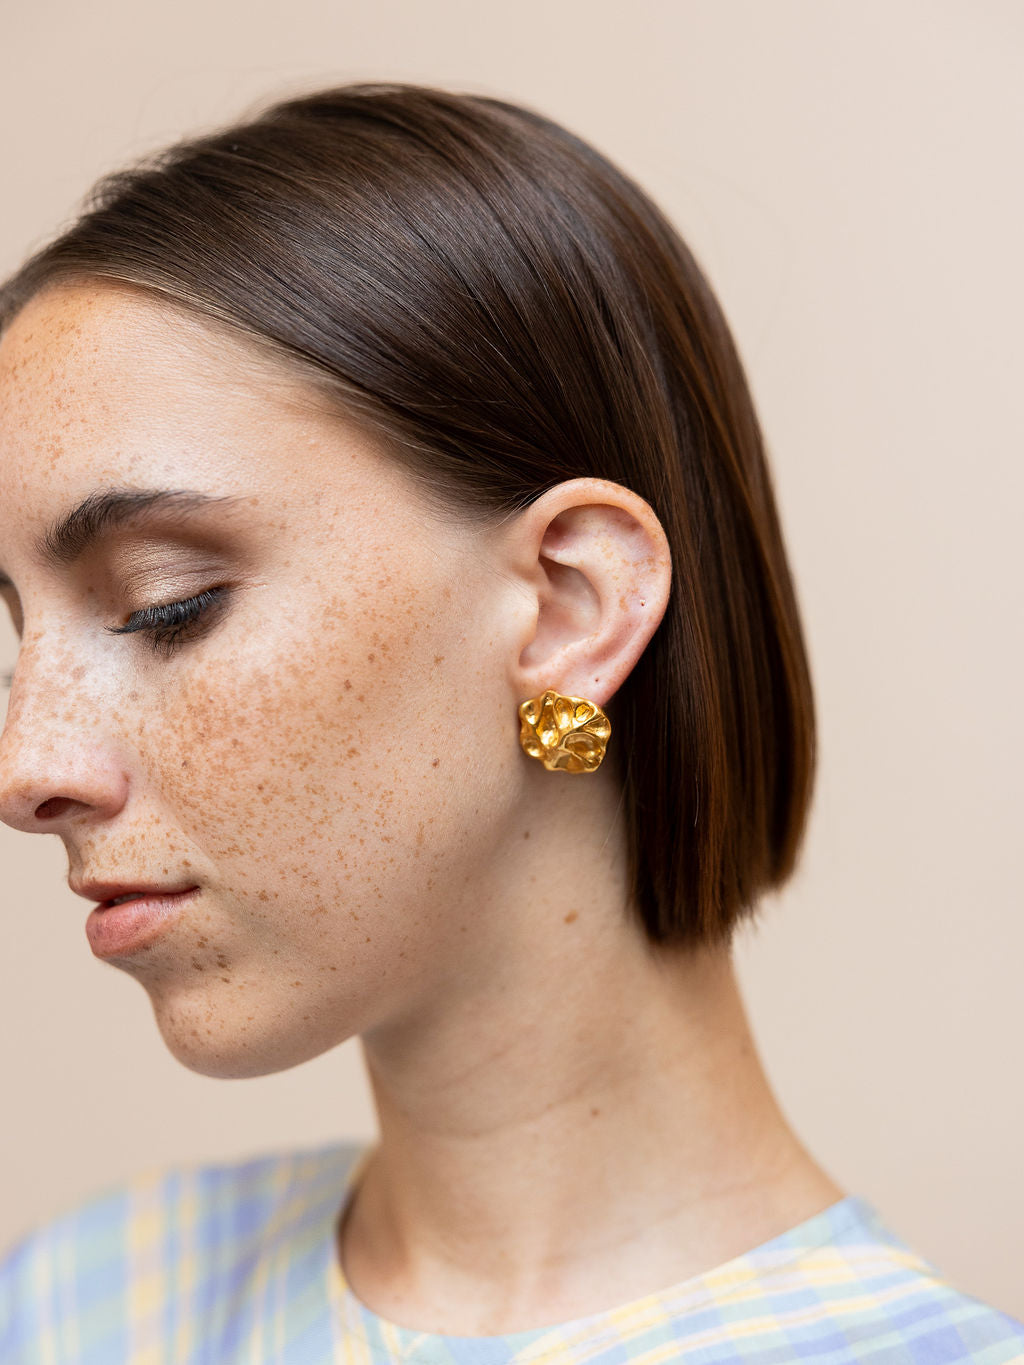 Woman wearing small gold textured earrings